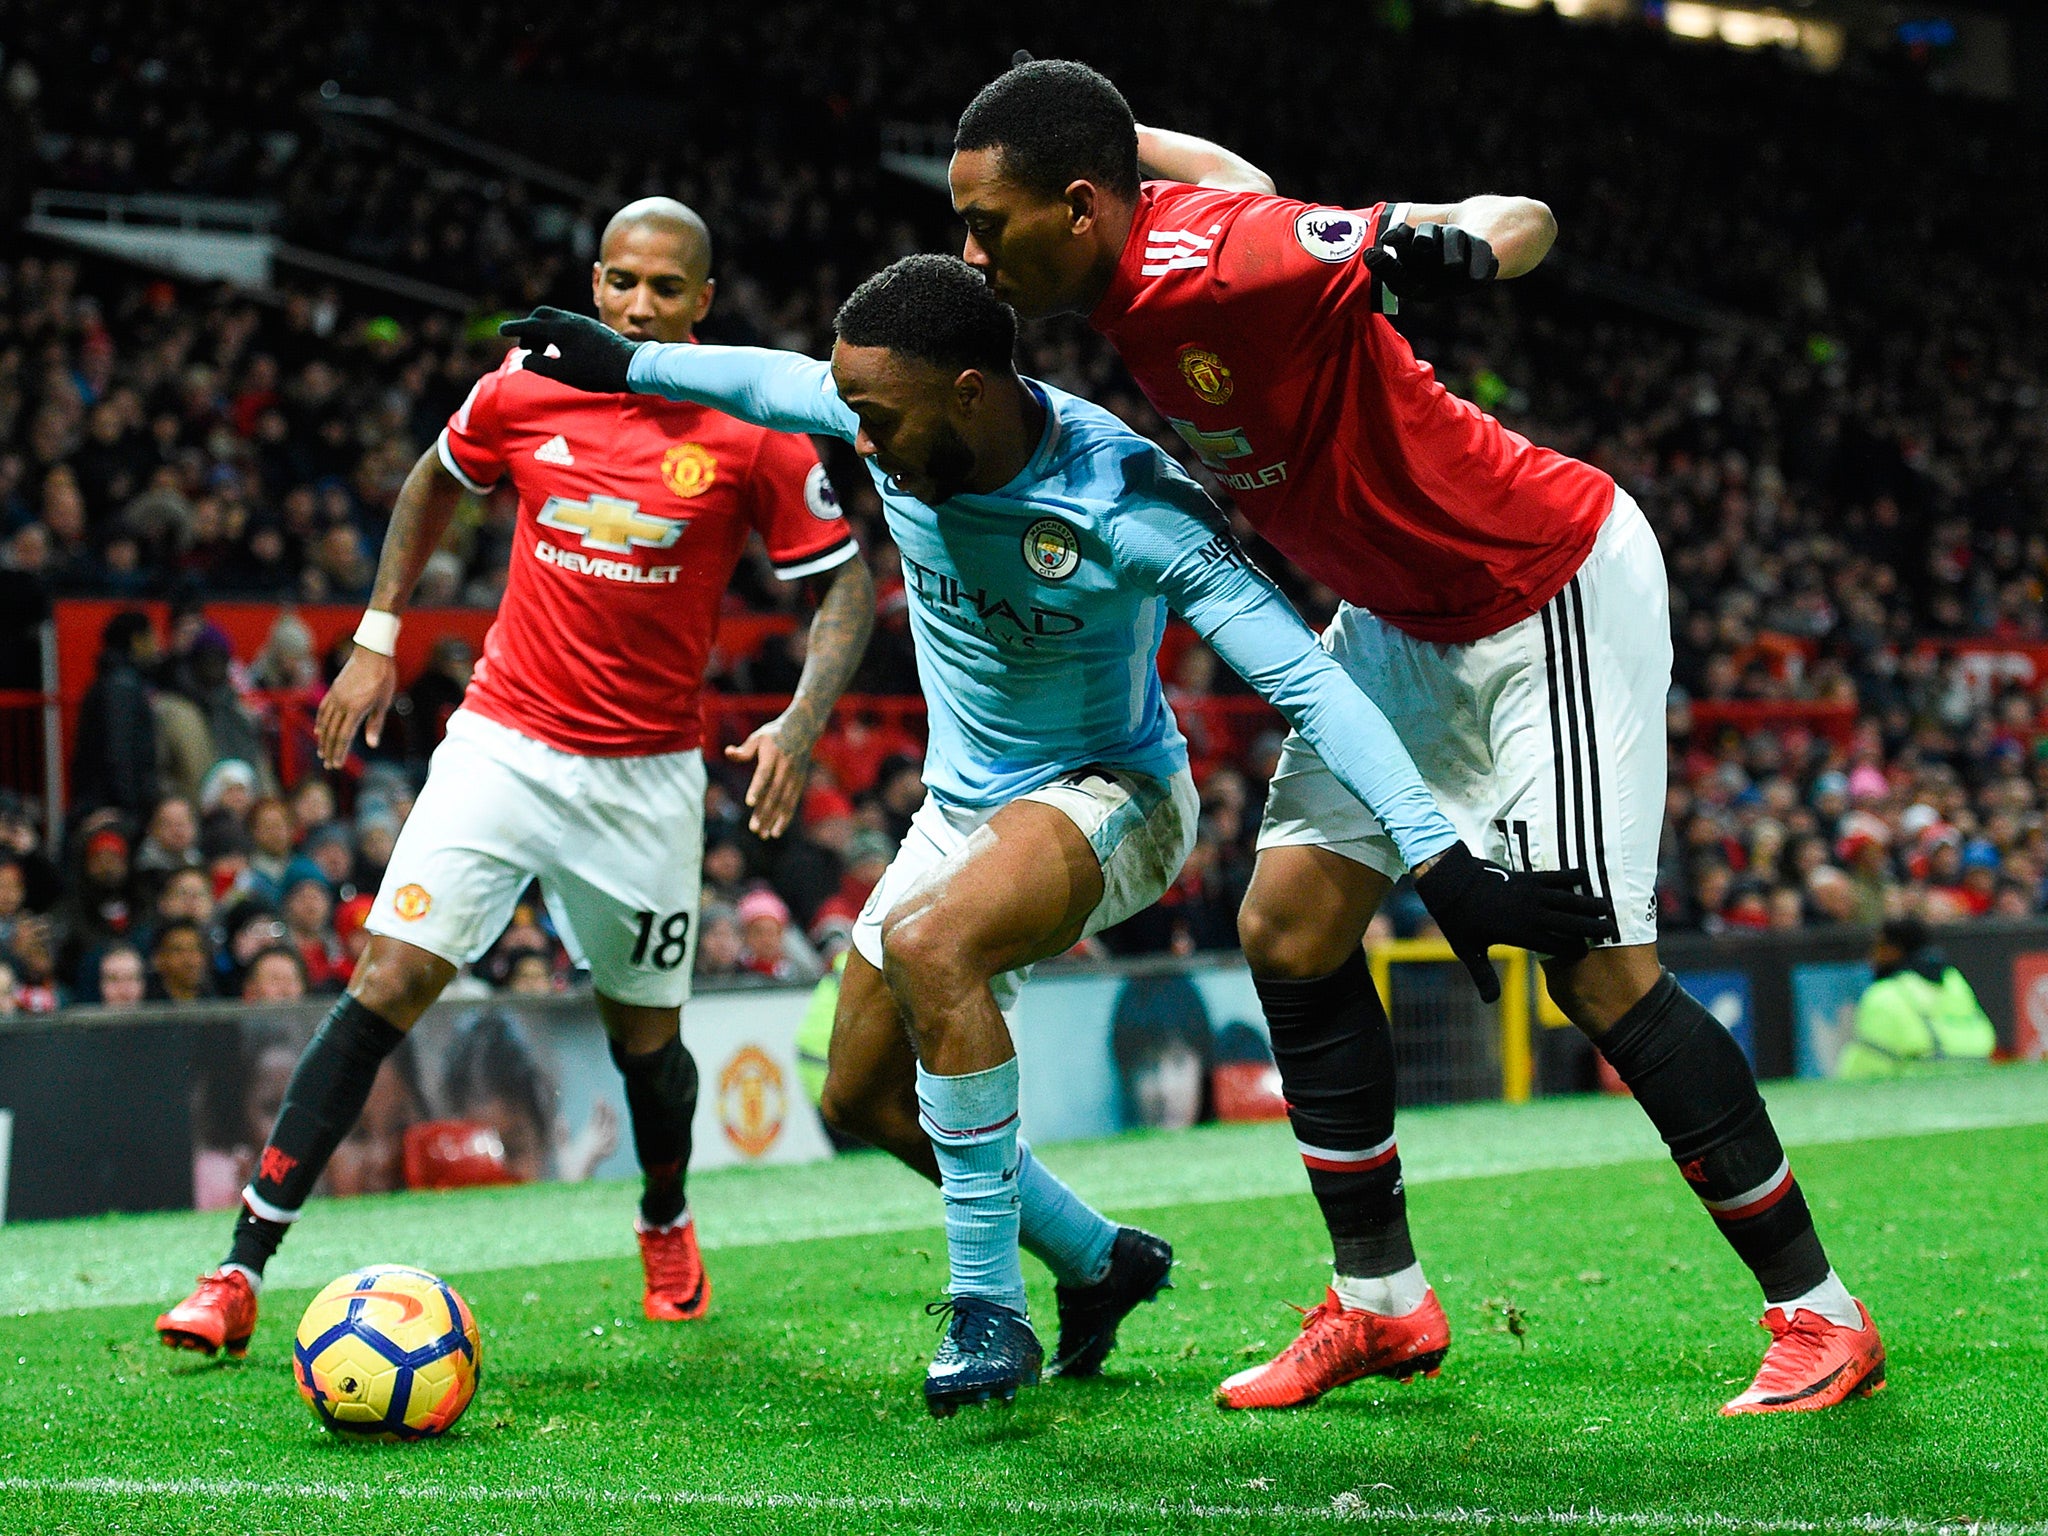 Both sets of players clashed after the Manchester derby earlier this month